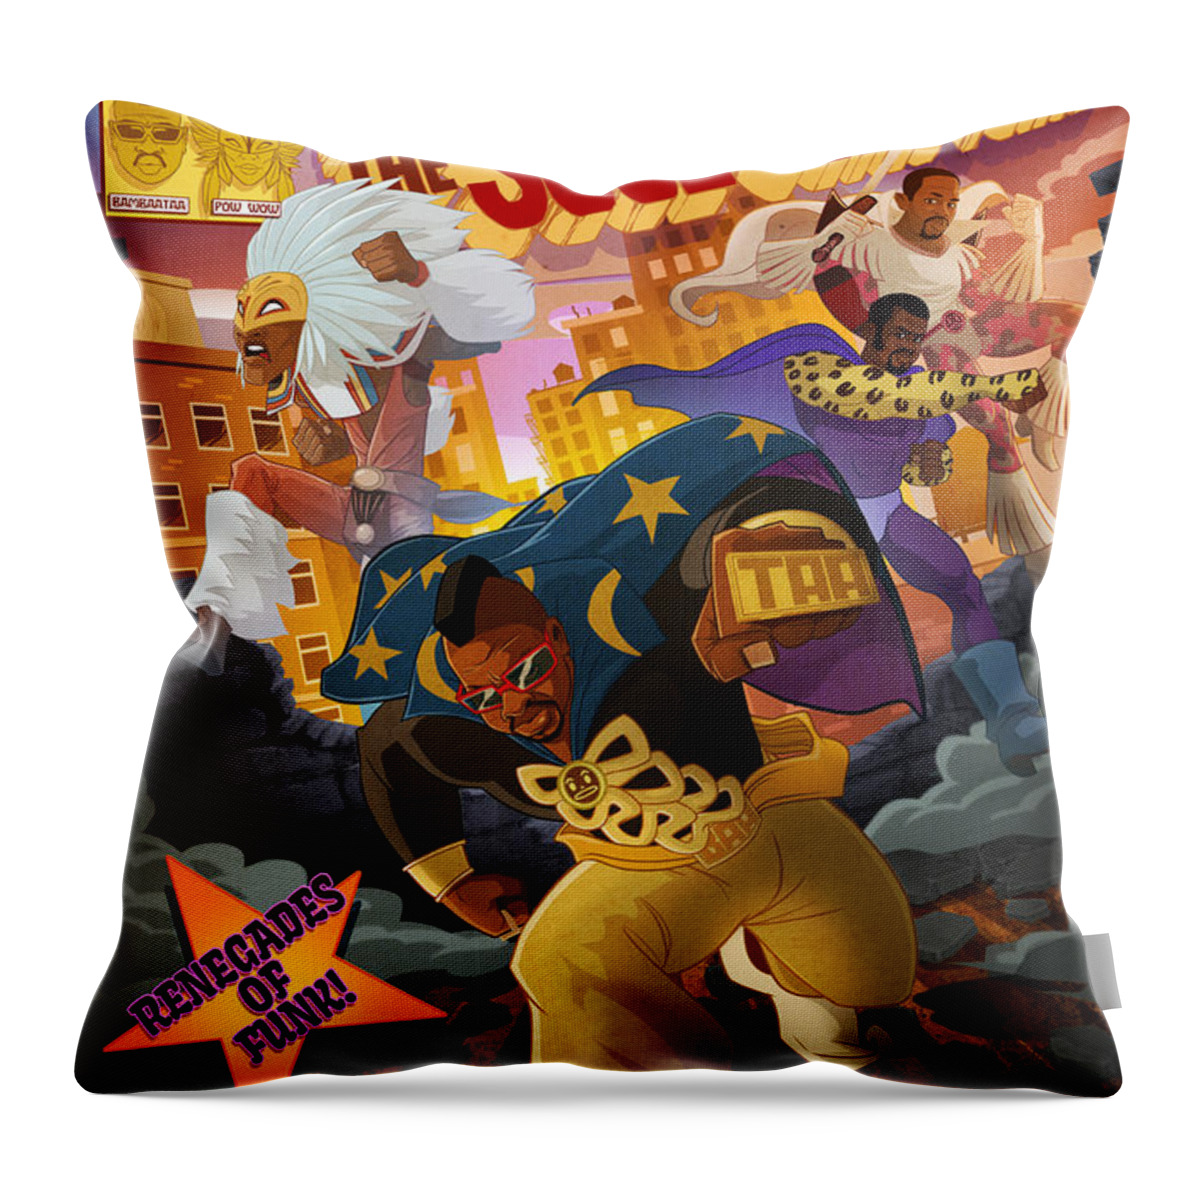 Afrika Bambaataa Throw Pillow featuring the digital art Soul Sonic Force by Nelson Dedos Garcia